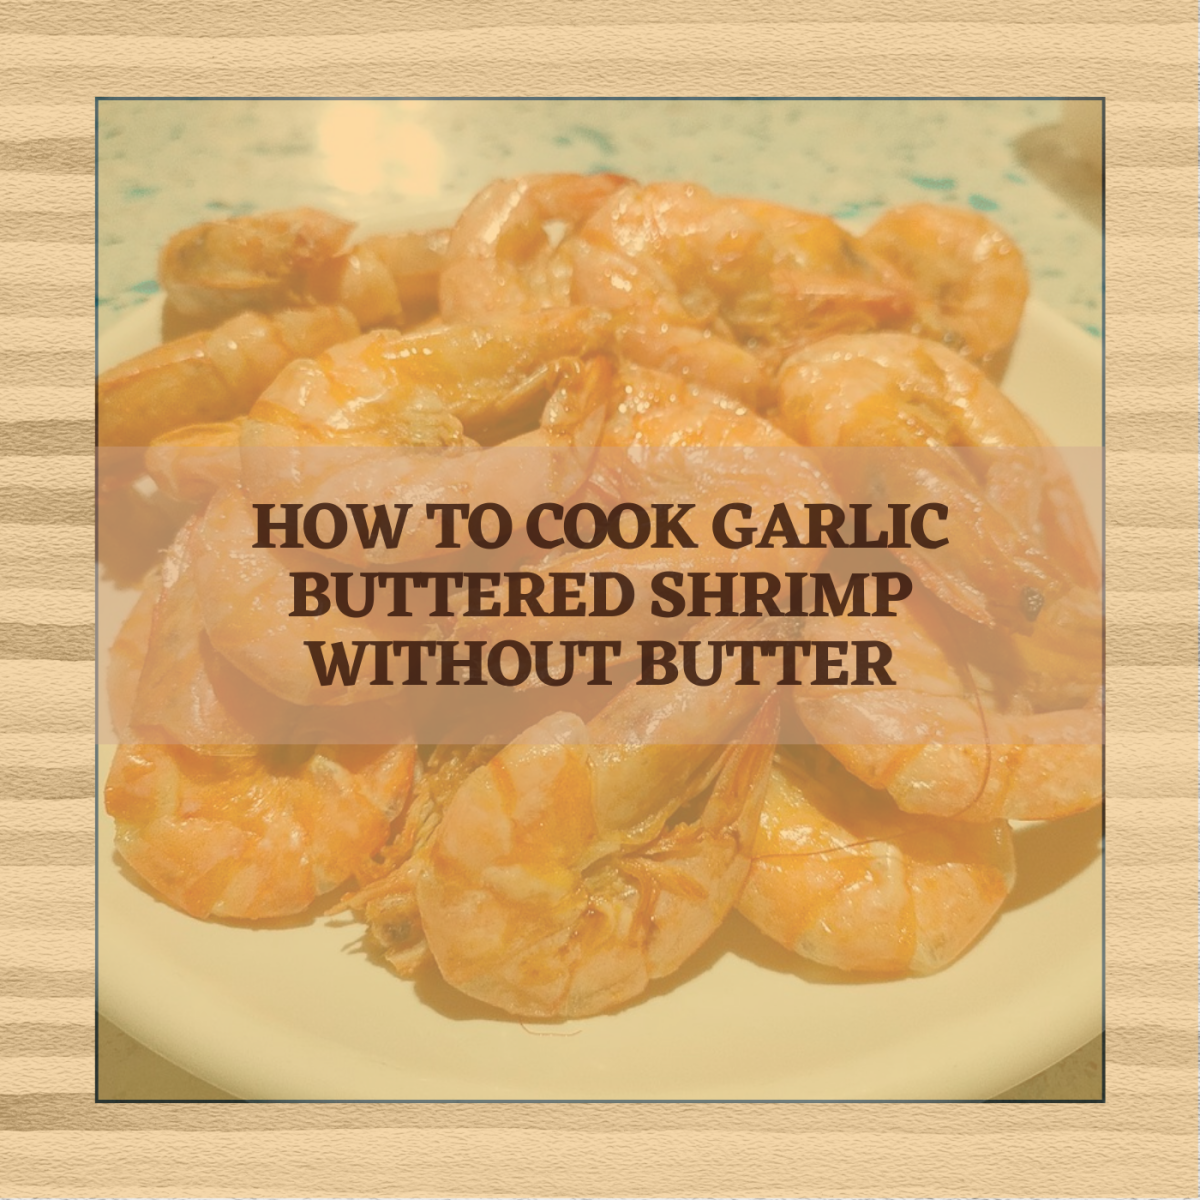 How to Cook Garlic-Buttered Shrimp Without Butter